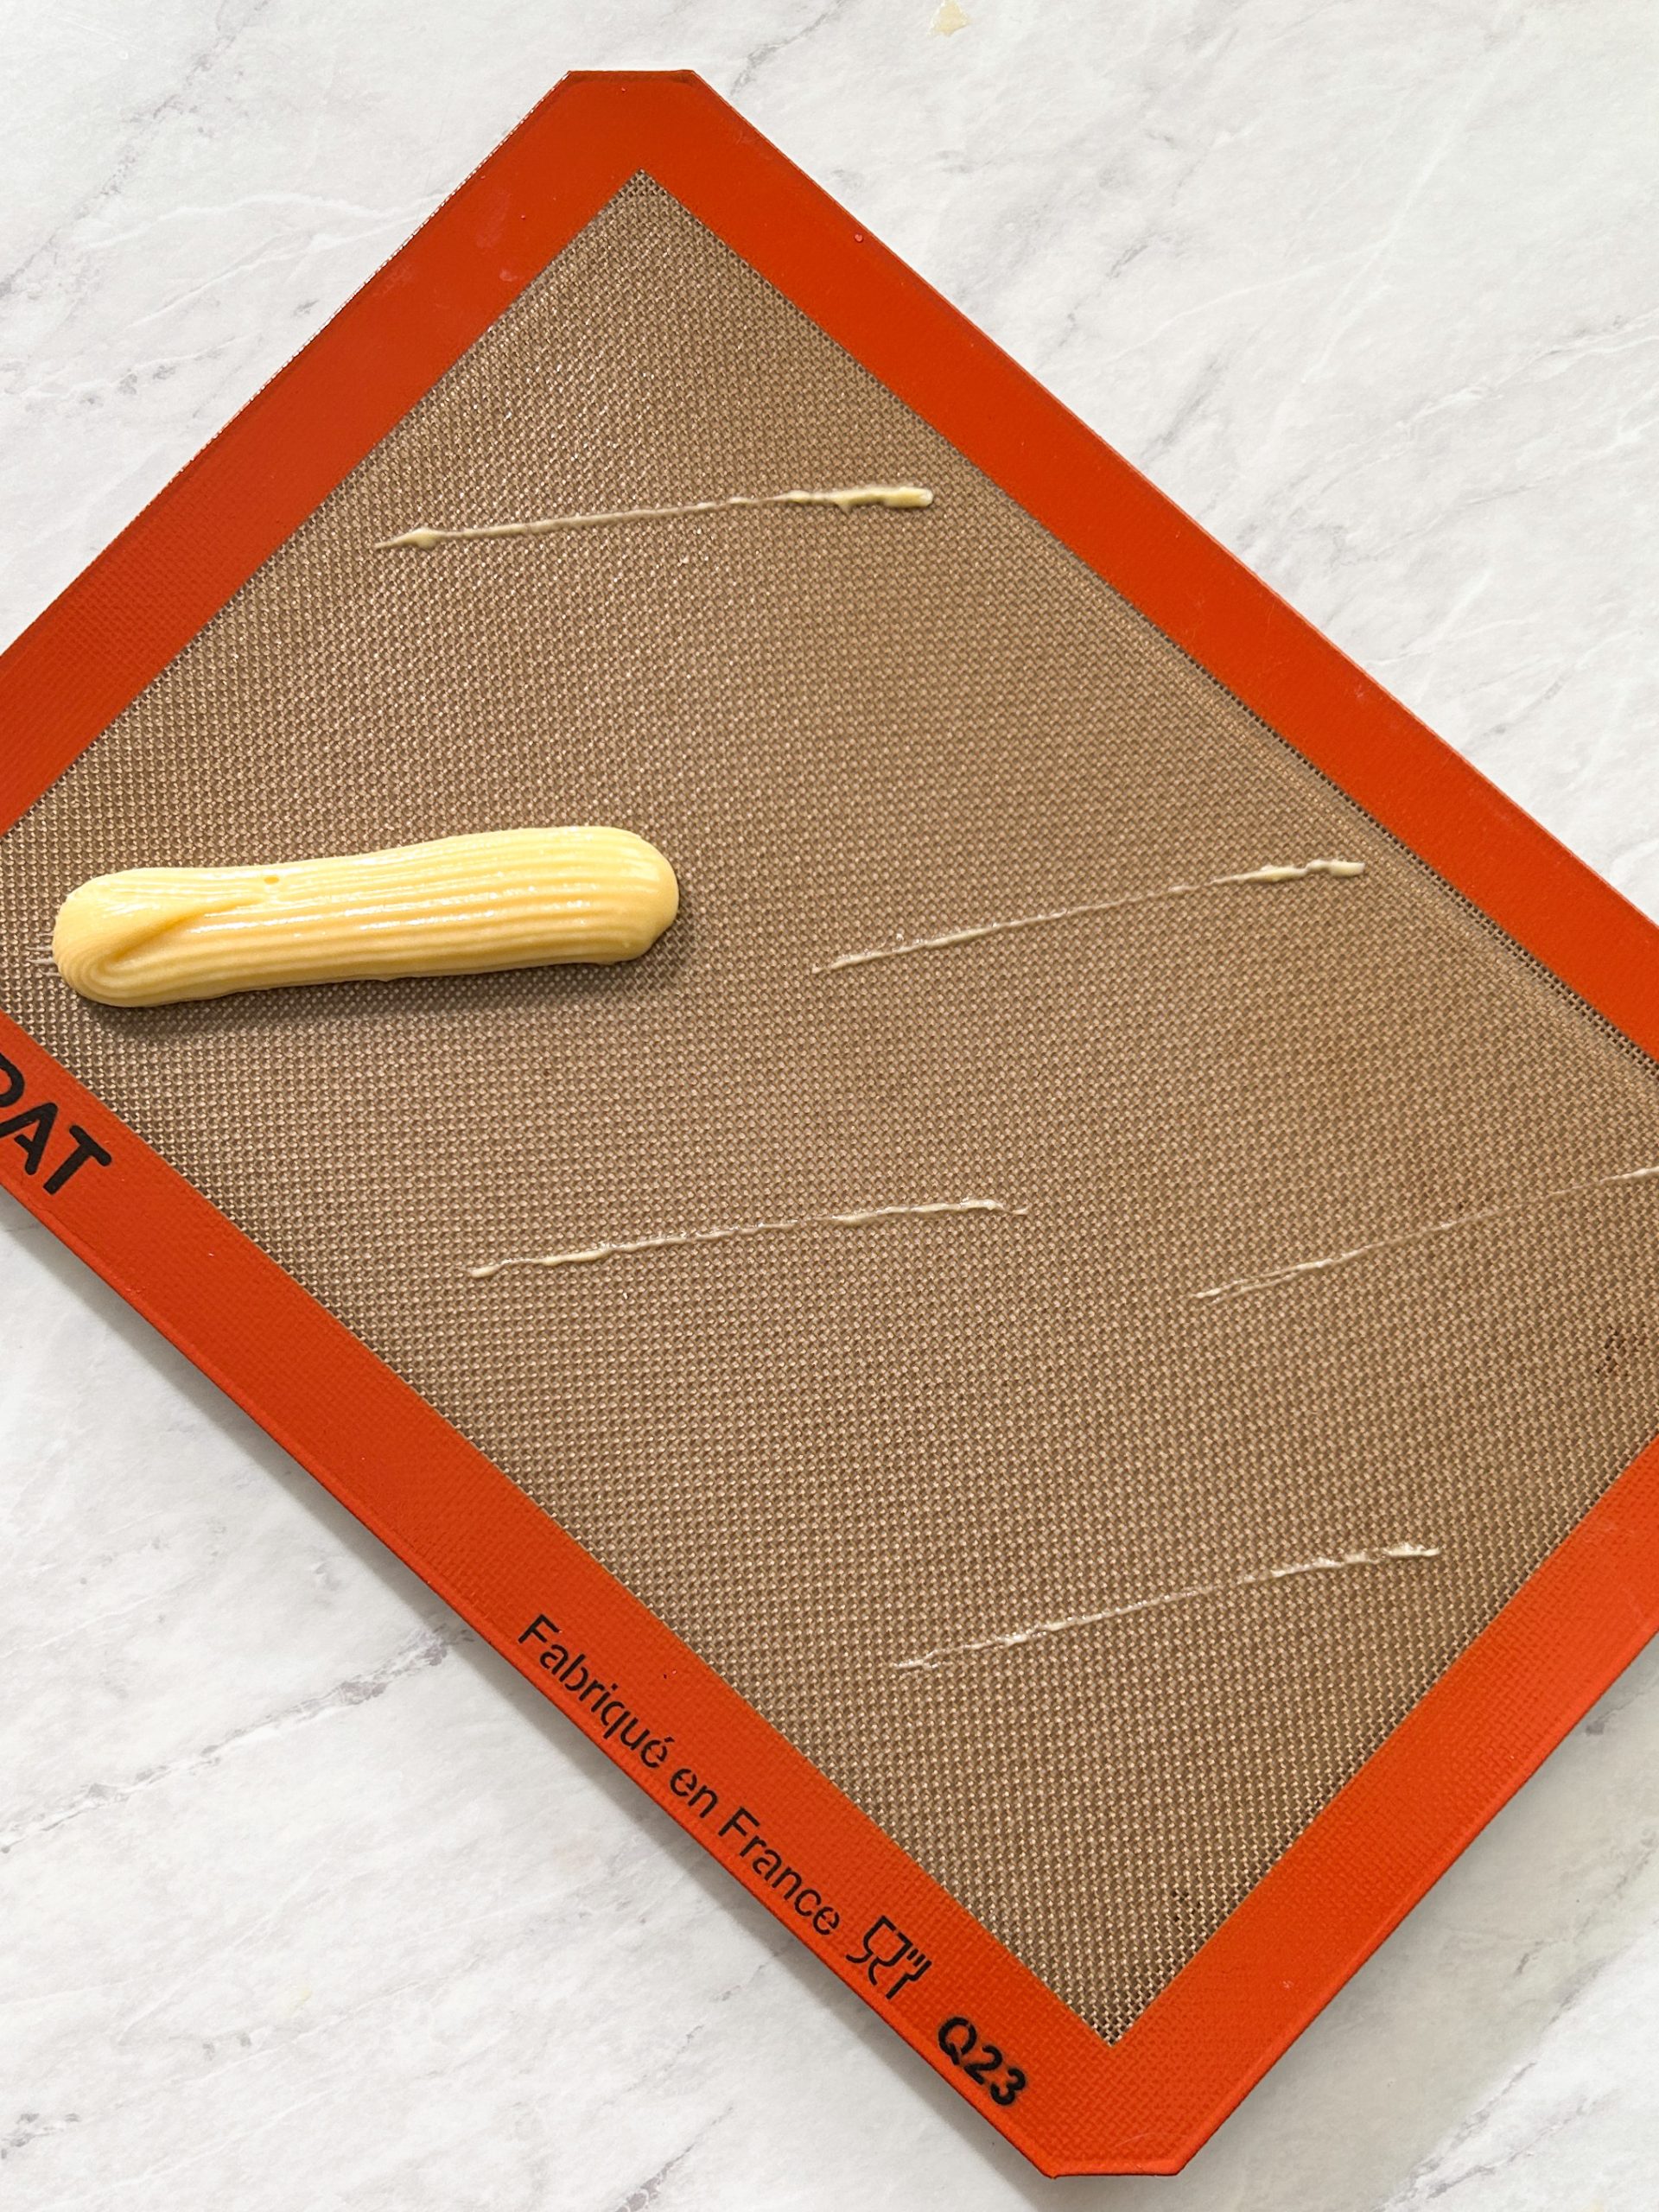 one eclair pipped onto a silicon baking mat